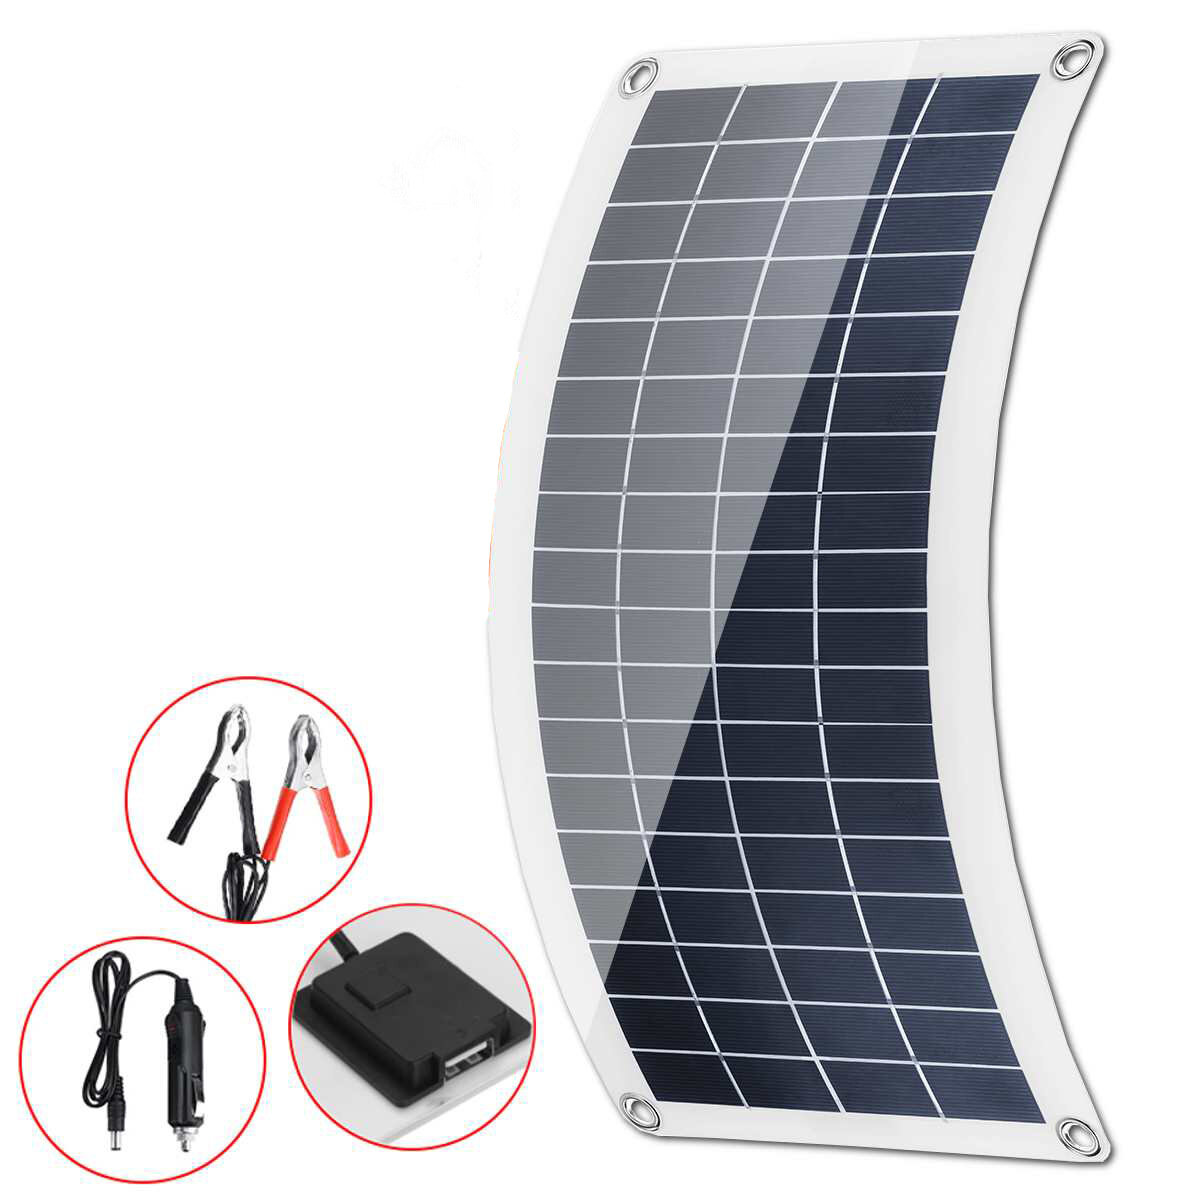 80W Solar Panel Kit 12V 10/20/30A LCD Controller Battery Charger Power Bank Outdoor Camping Travel